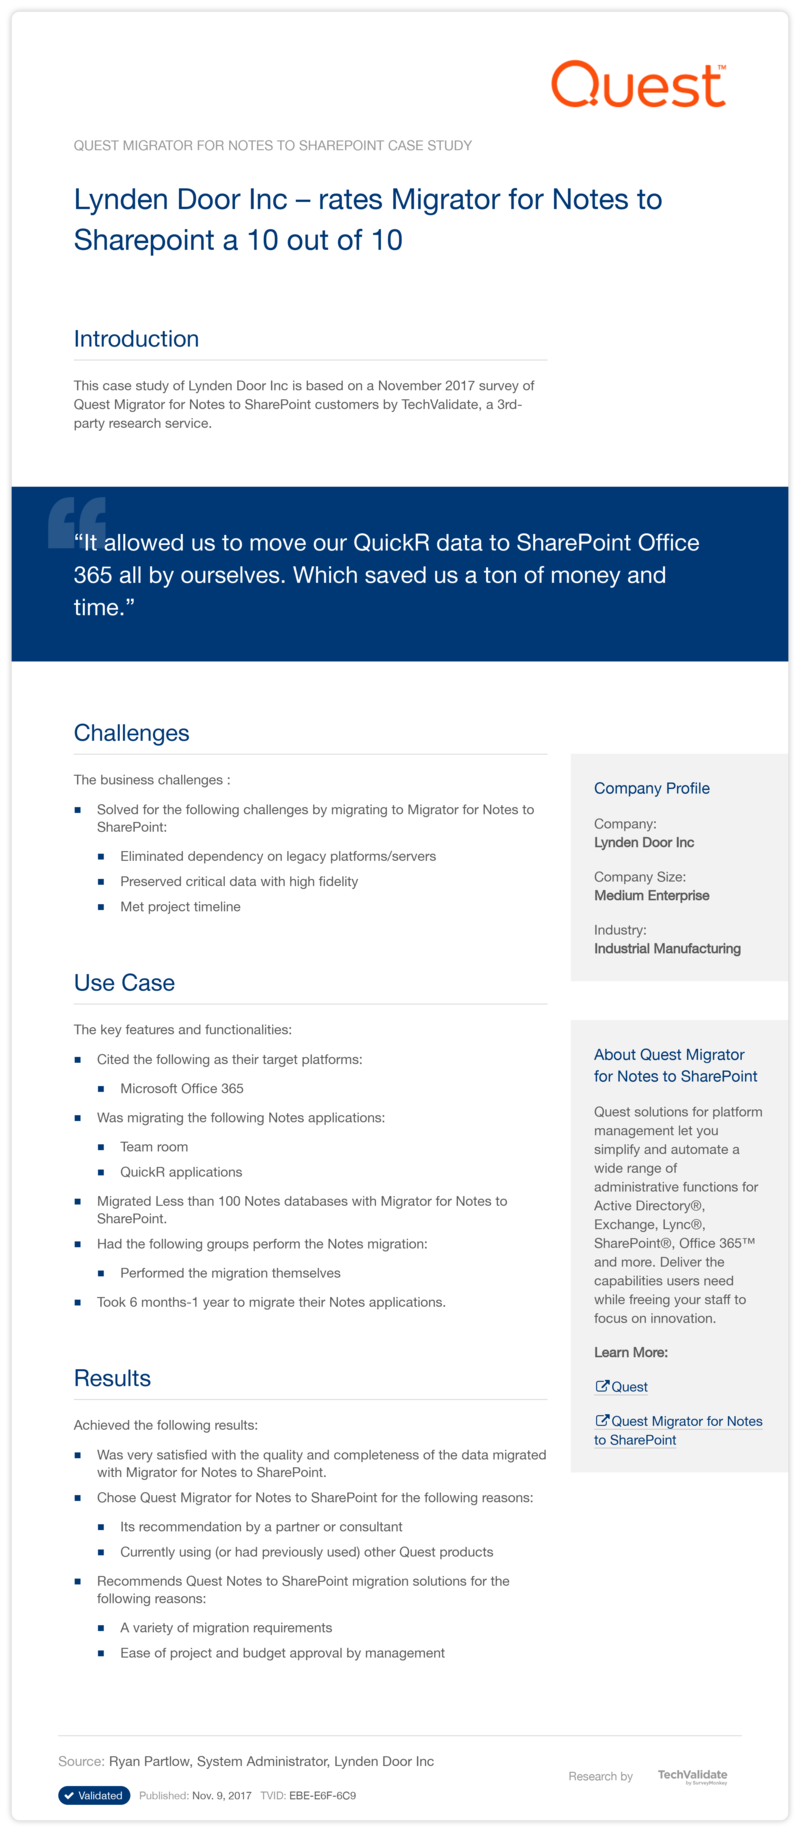 Lynden Door Inc-rates Migrator for Notes to Sharepoint a 10 out of 10